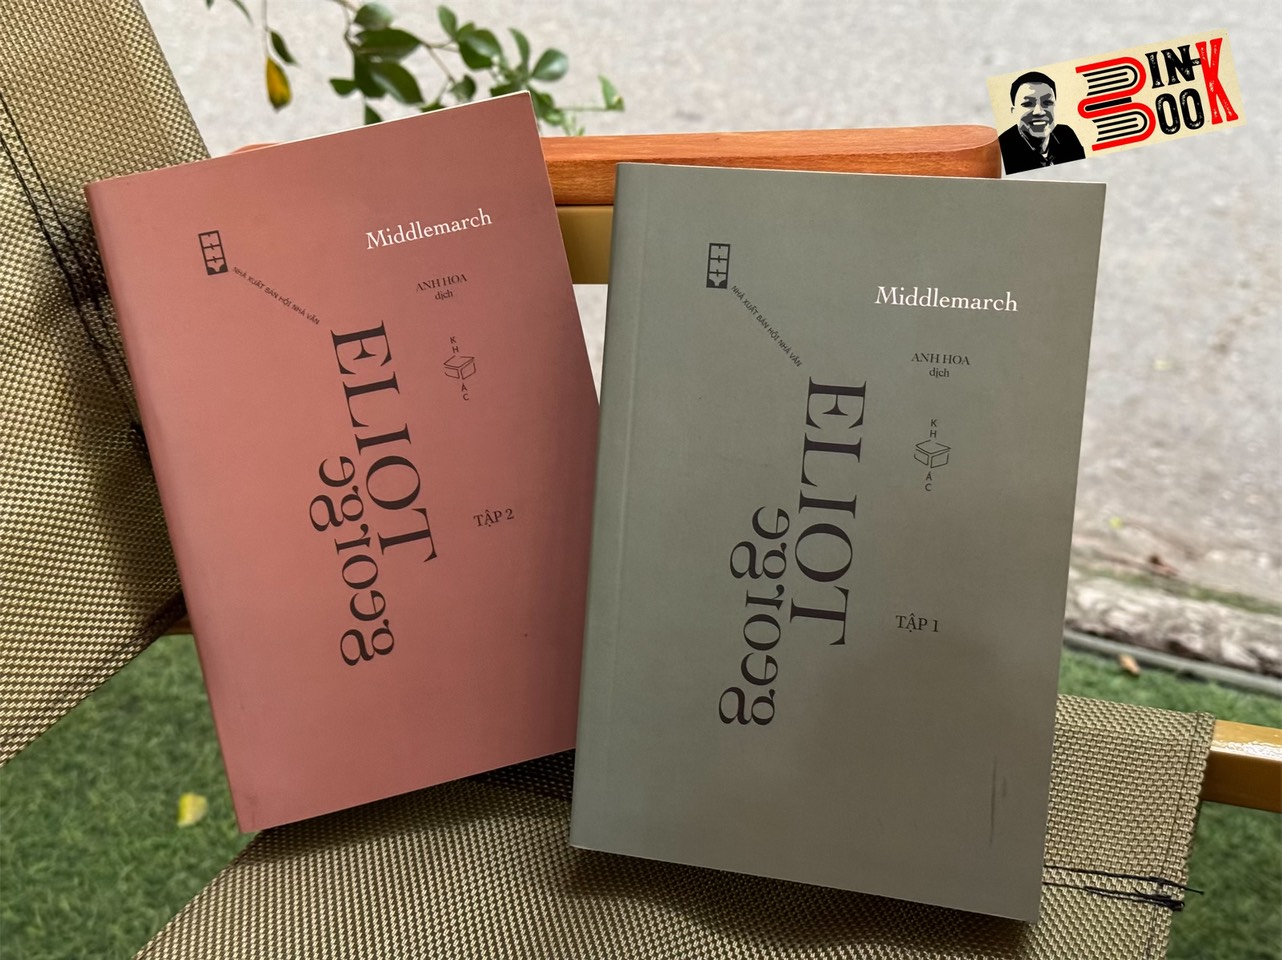 MIDDLEMARCH - George Eliot - Anh Hoa dịch - Xuất Bản Khác